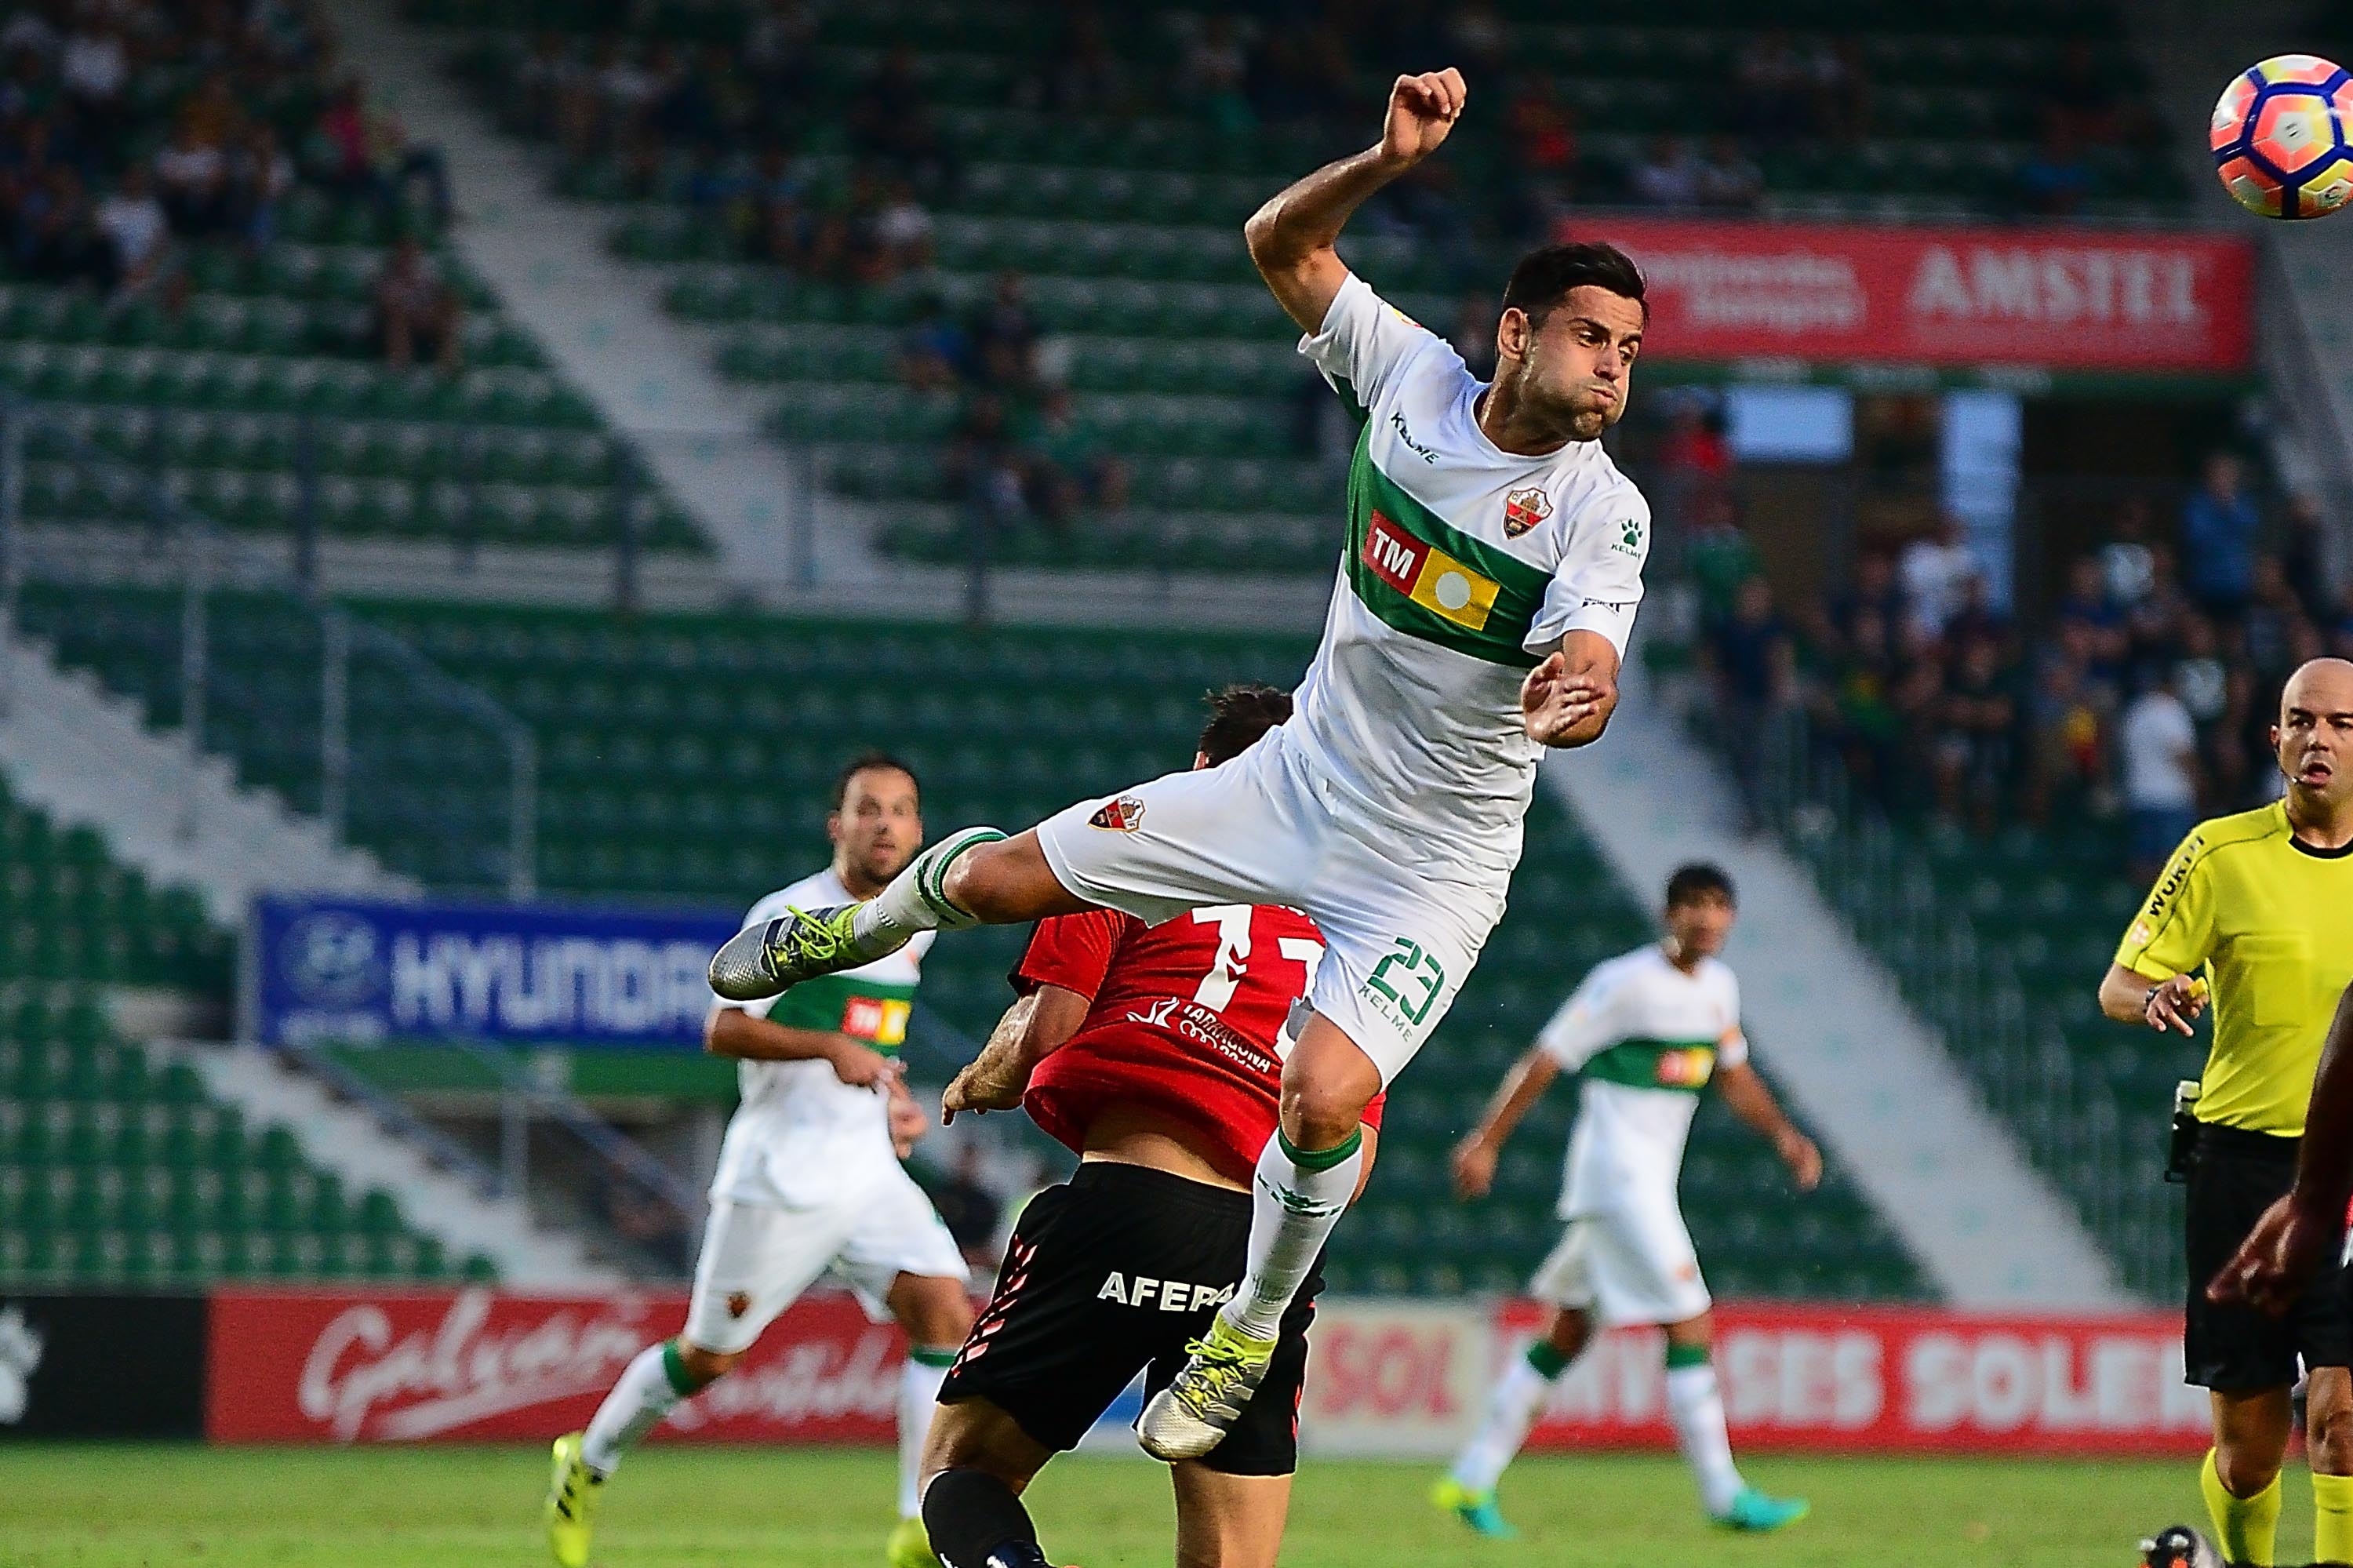 Albert Dorca scored the Elche fourth as they came from behind to scrounge a point